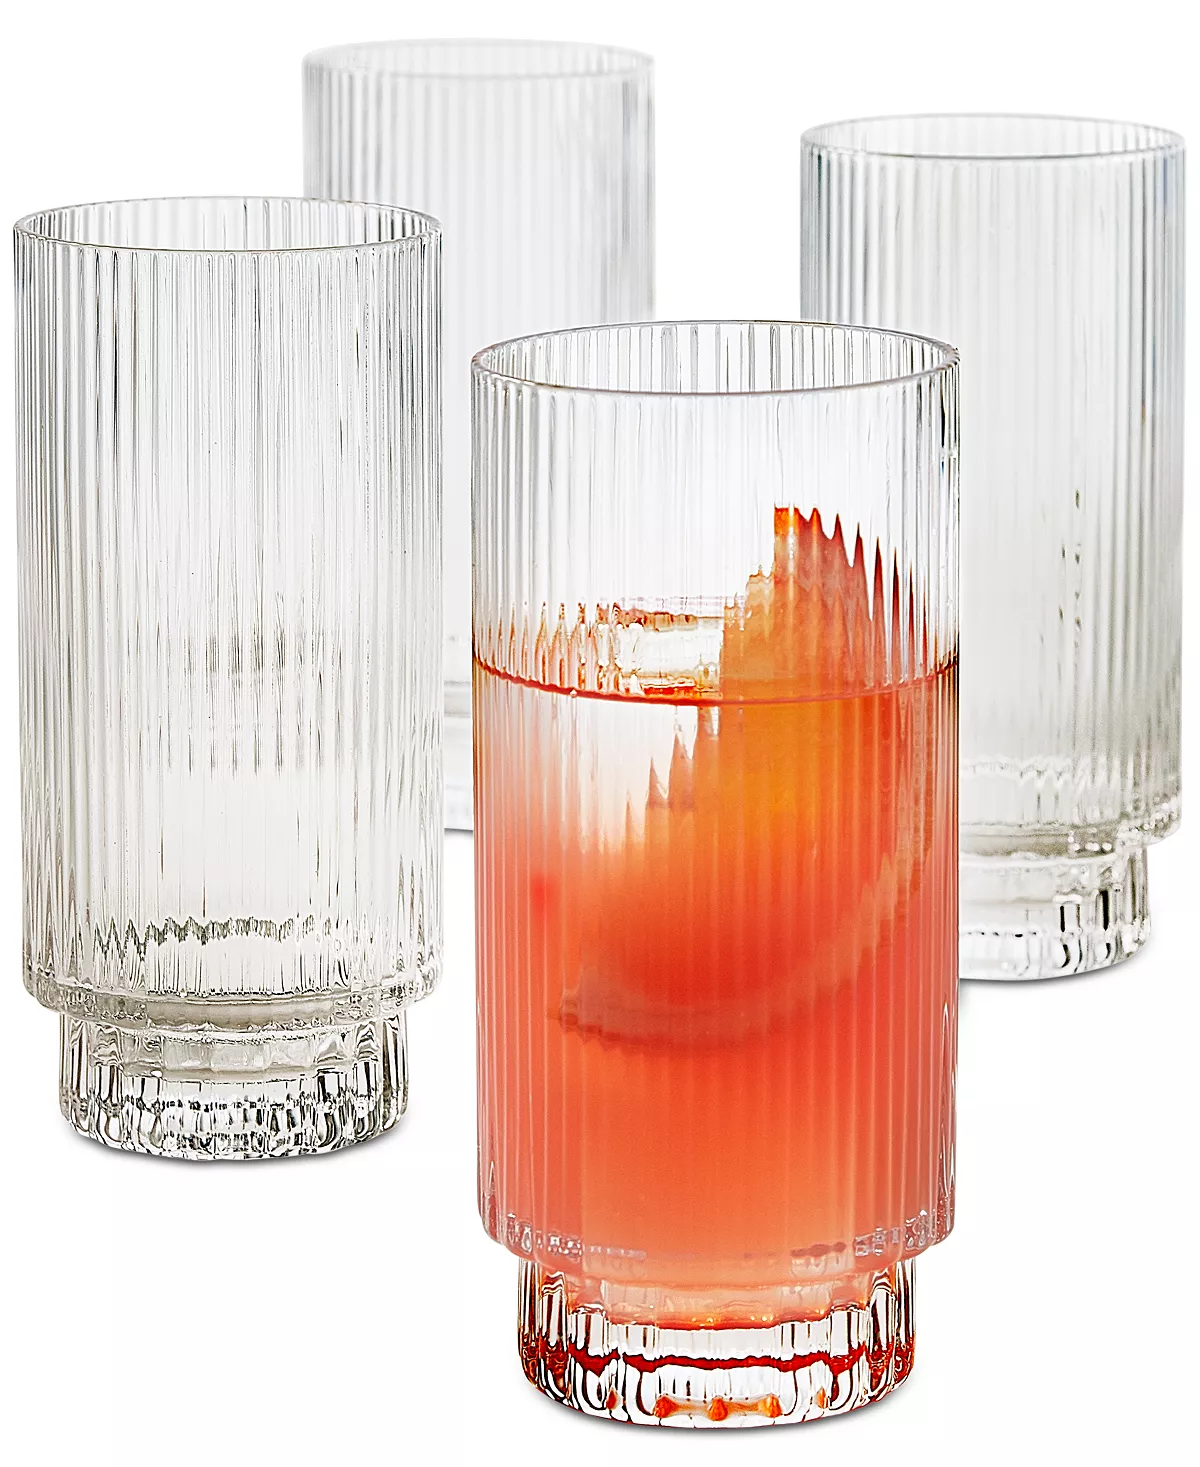 9 Types of Cocktail Glasses You Need at Home 2021